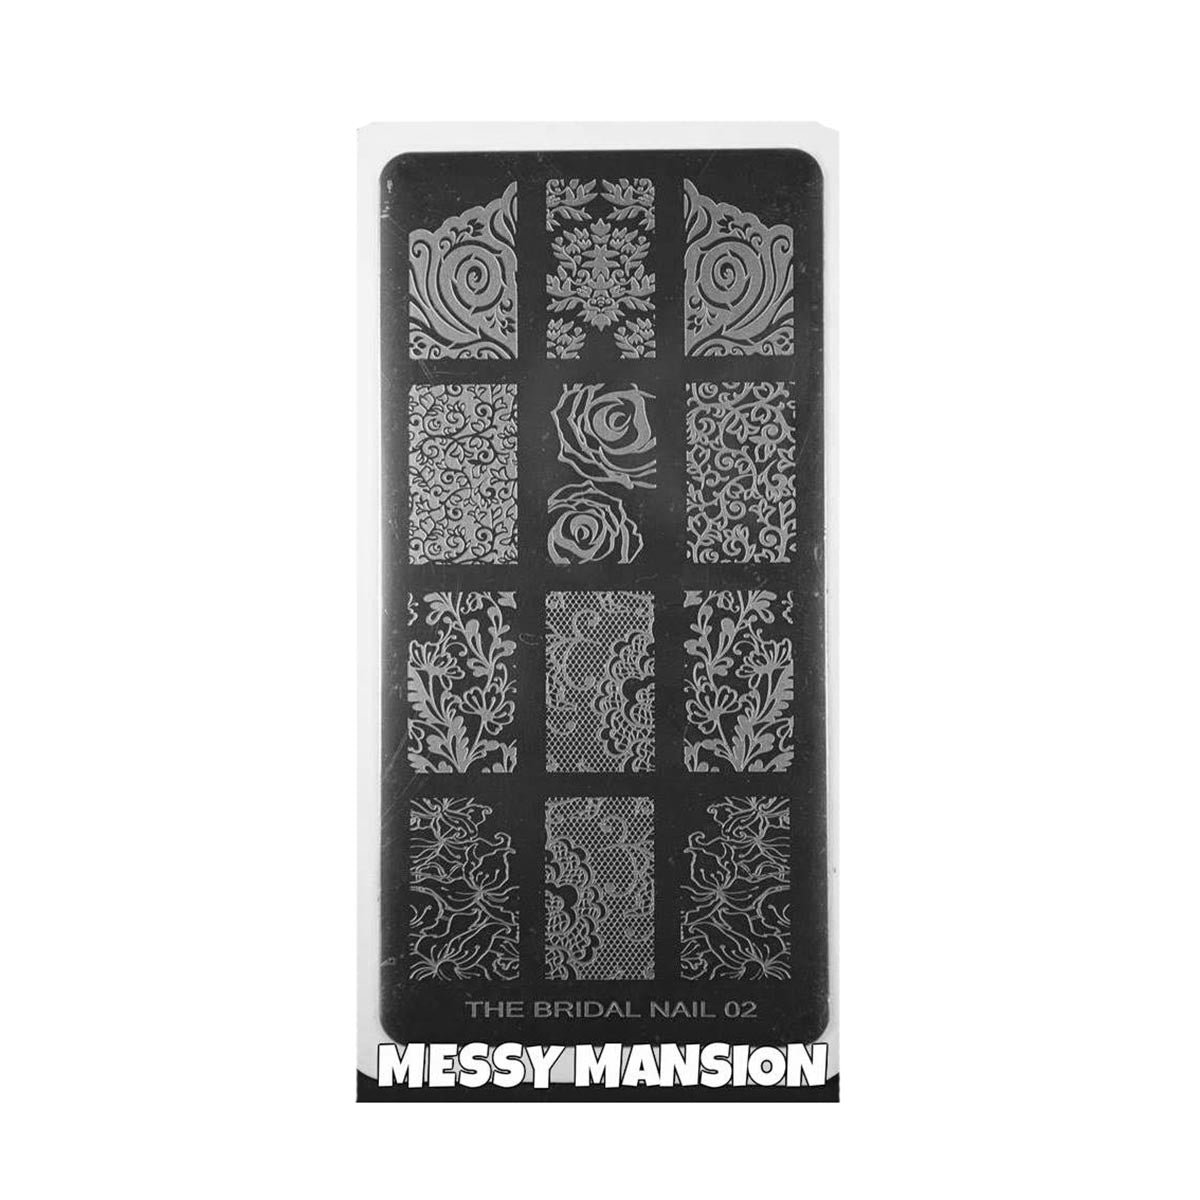 BN02 Messy Mansion Nail Stamping Plate